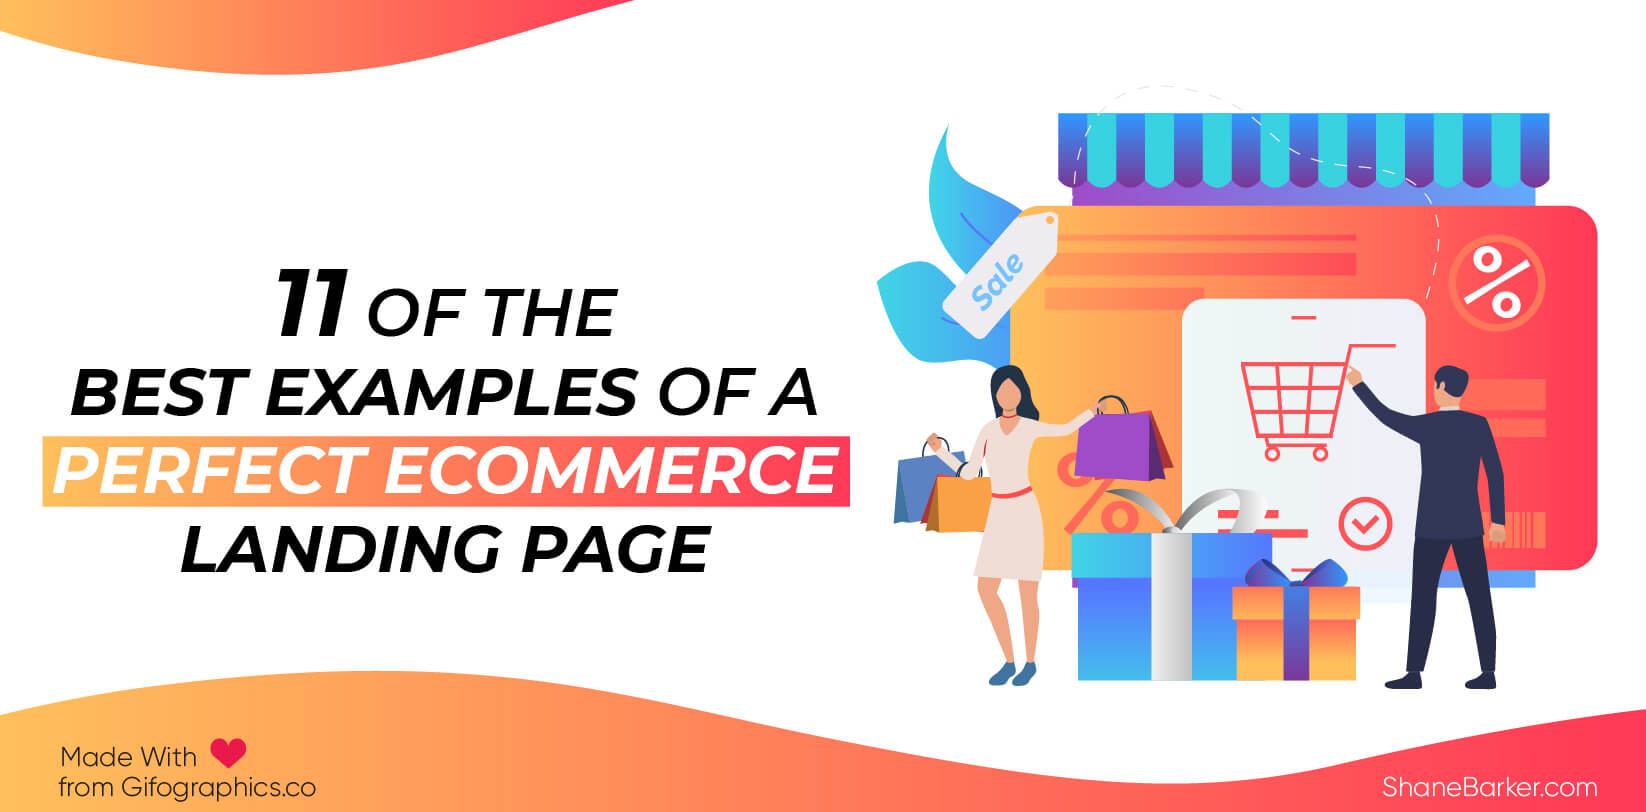 11 of the Best Examples of a Perfect Ecommerce Landing Page